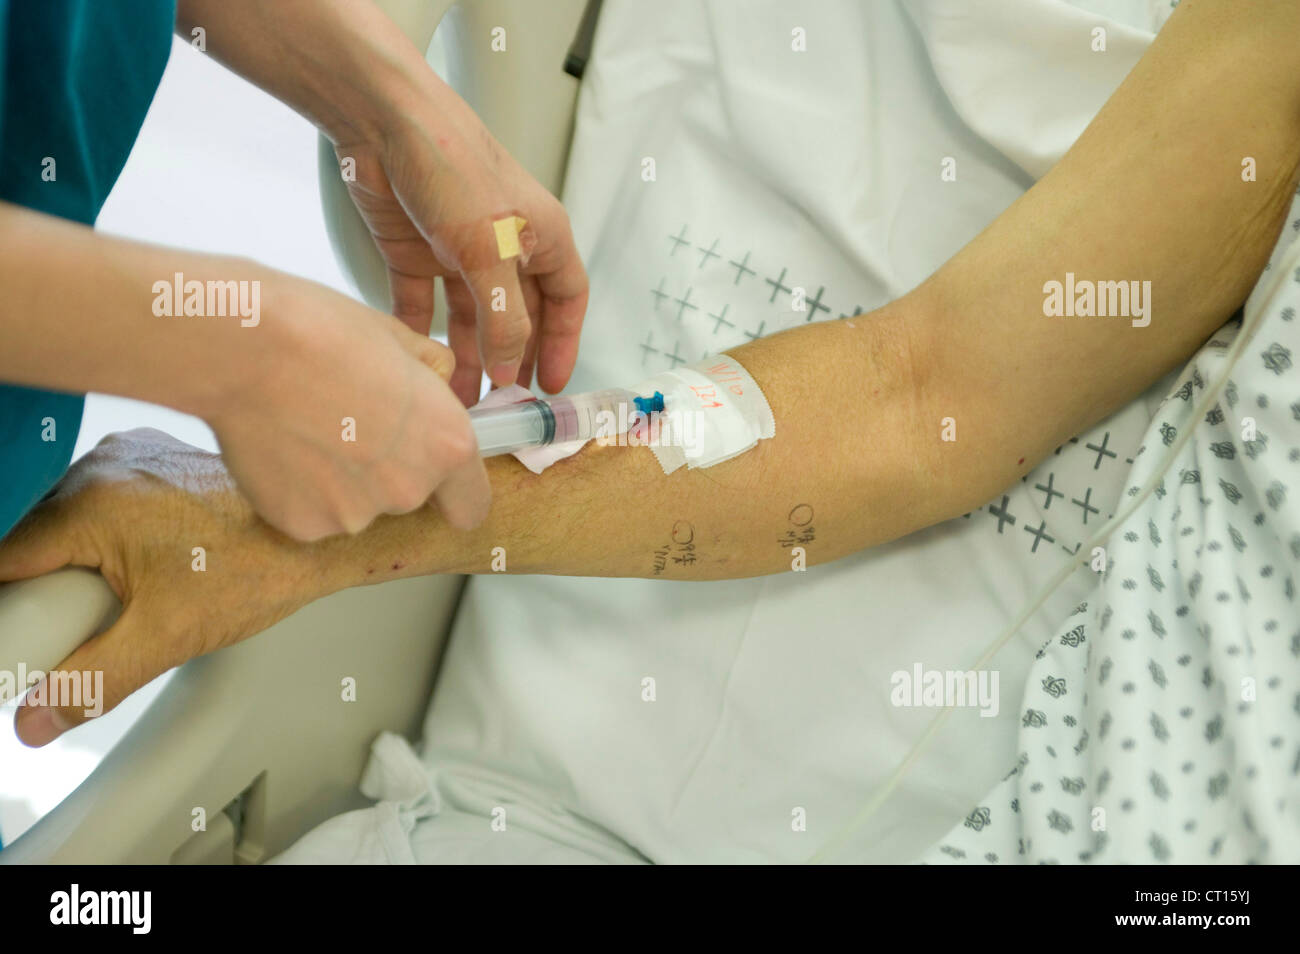 A patient has an intravenous drip inserted into the arm, on an intensive care unit. Stock Photo